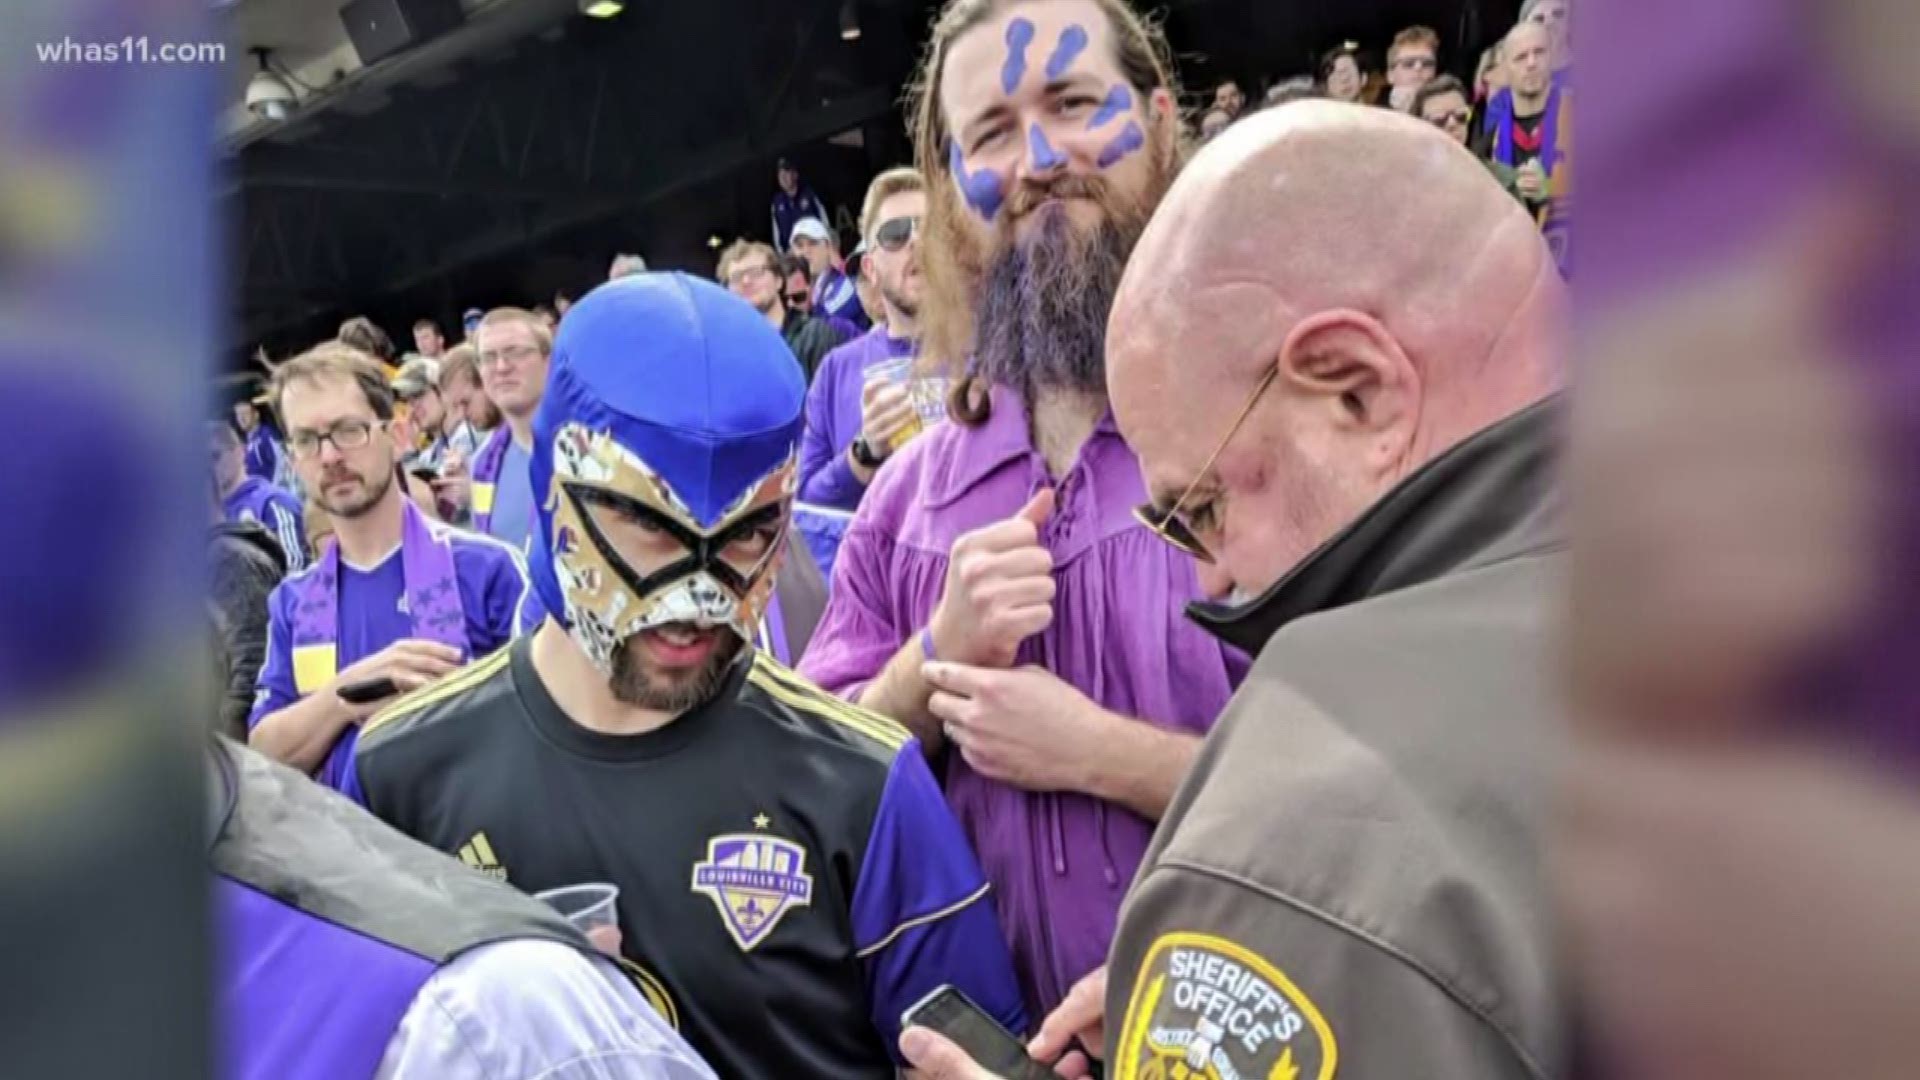 Lou. City soccer supporters told to take off masks during game